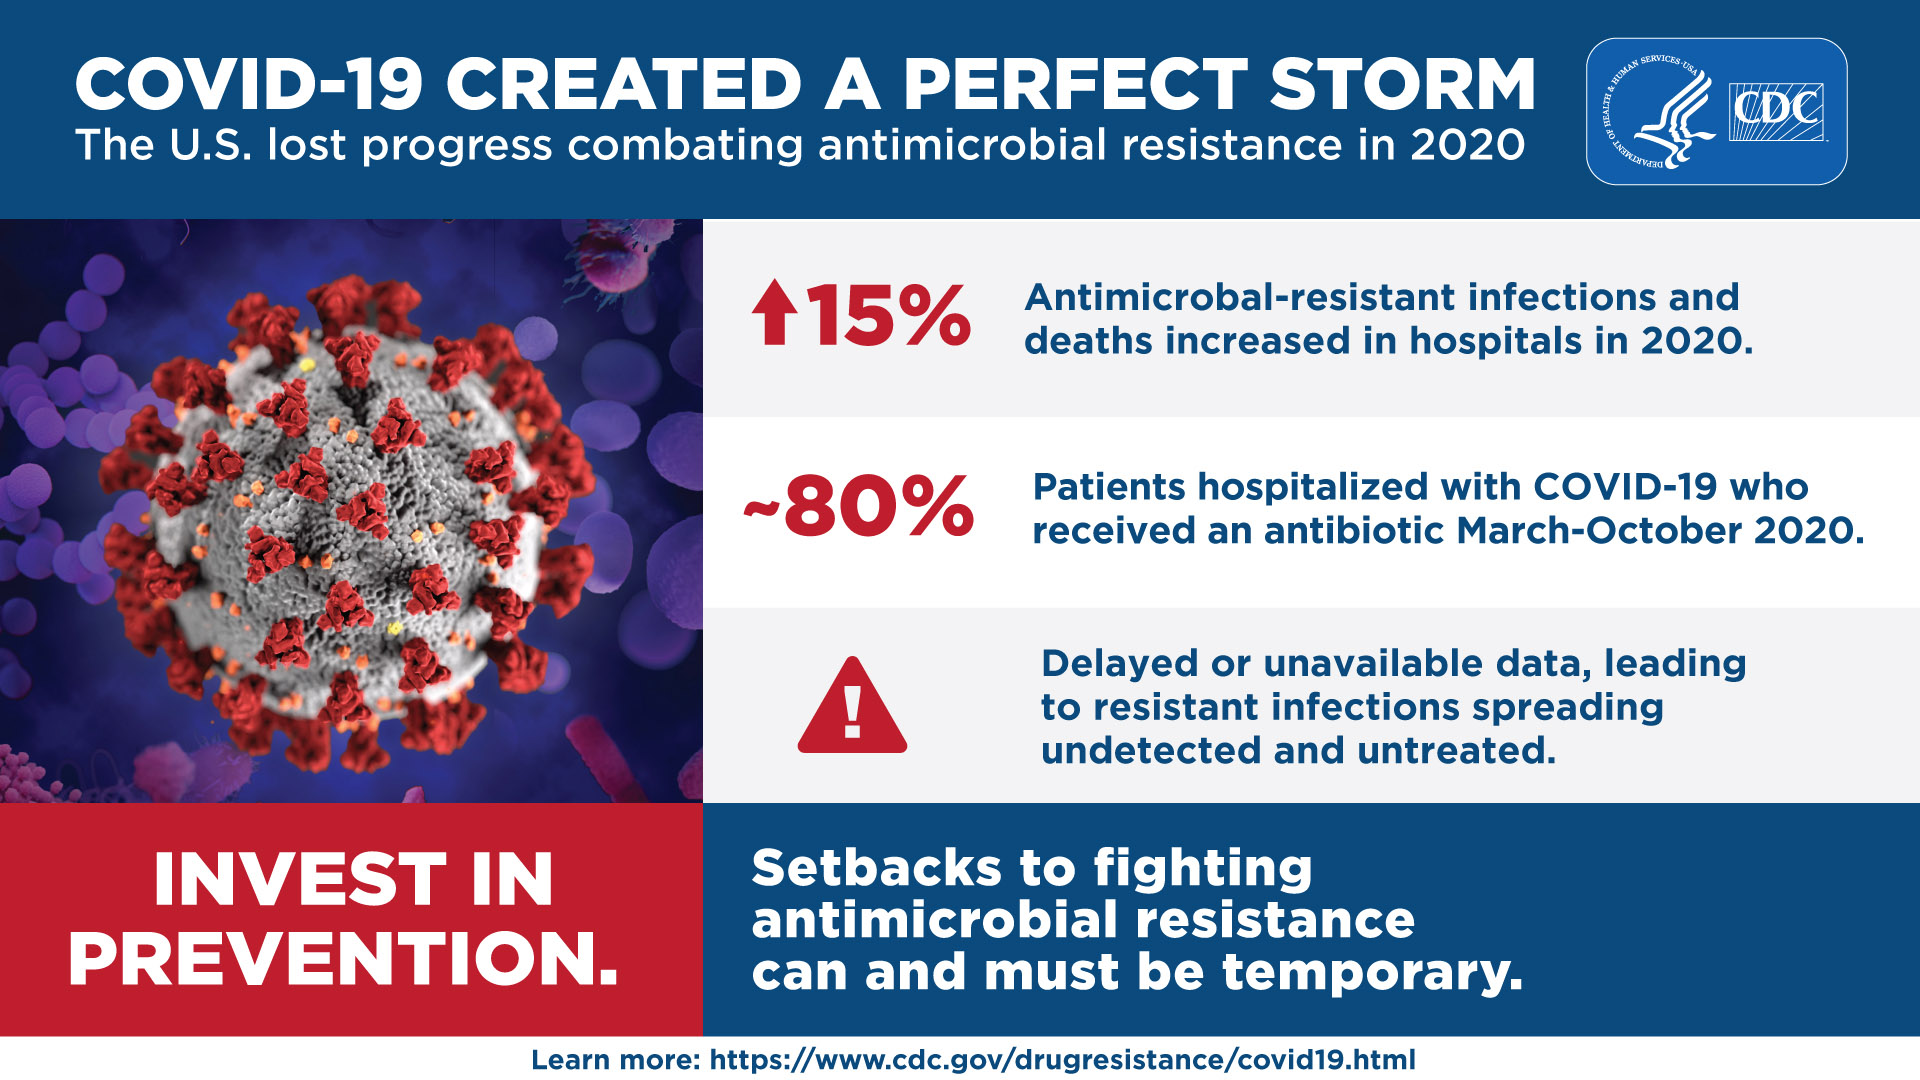 COVID-19 created a perfect storm : the U.S. lost progress combating antimicrobial resistance in 2020